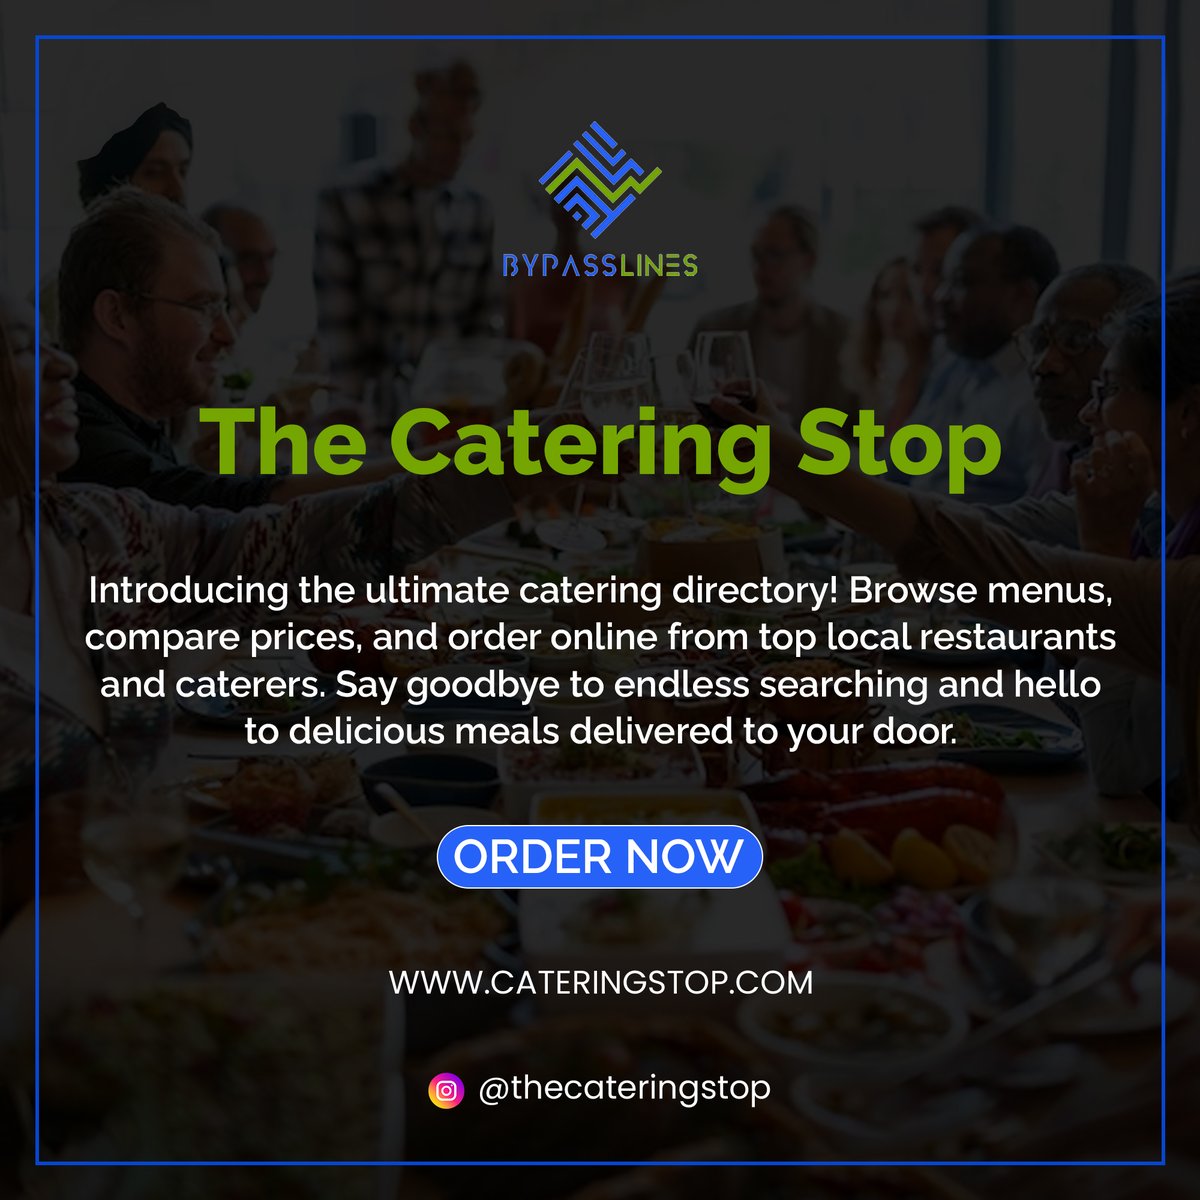 Want to make a positive impact in your community? @BypassLinesApp connects you with local biz offering exclusive deals & discounts while supporting local organisations. 

Join us now!

 #shoplocal #local #fundraisingplatform #onlinefundraising #CateringStop #bypasslinesapp